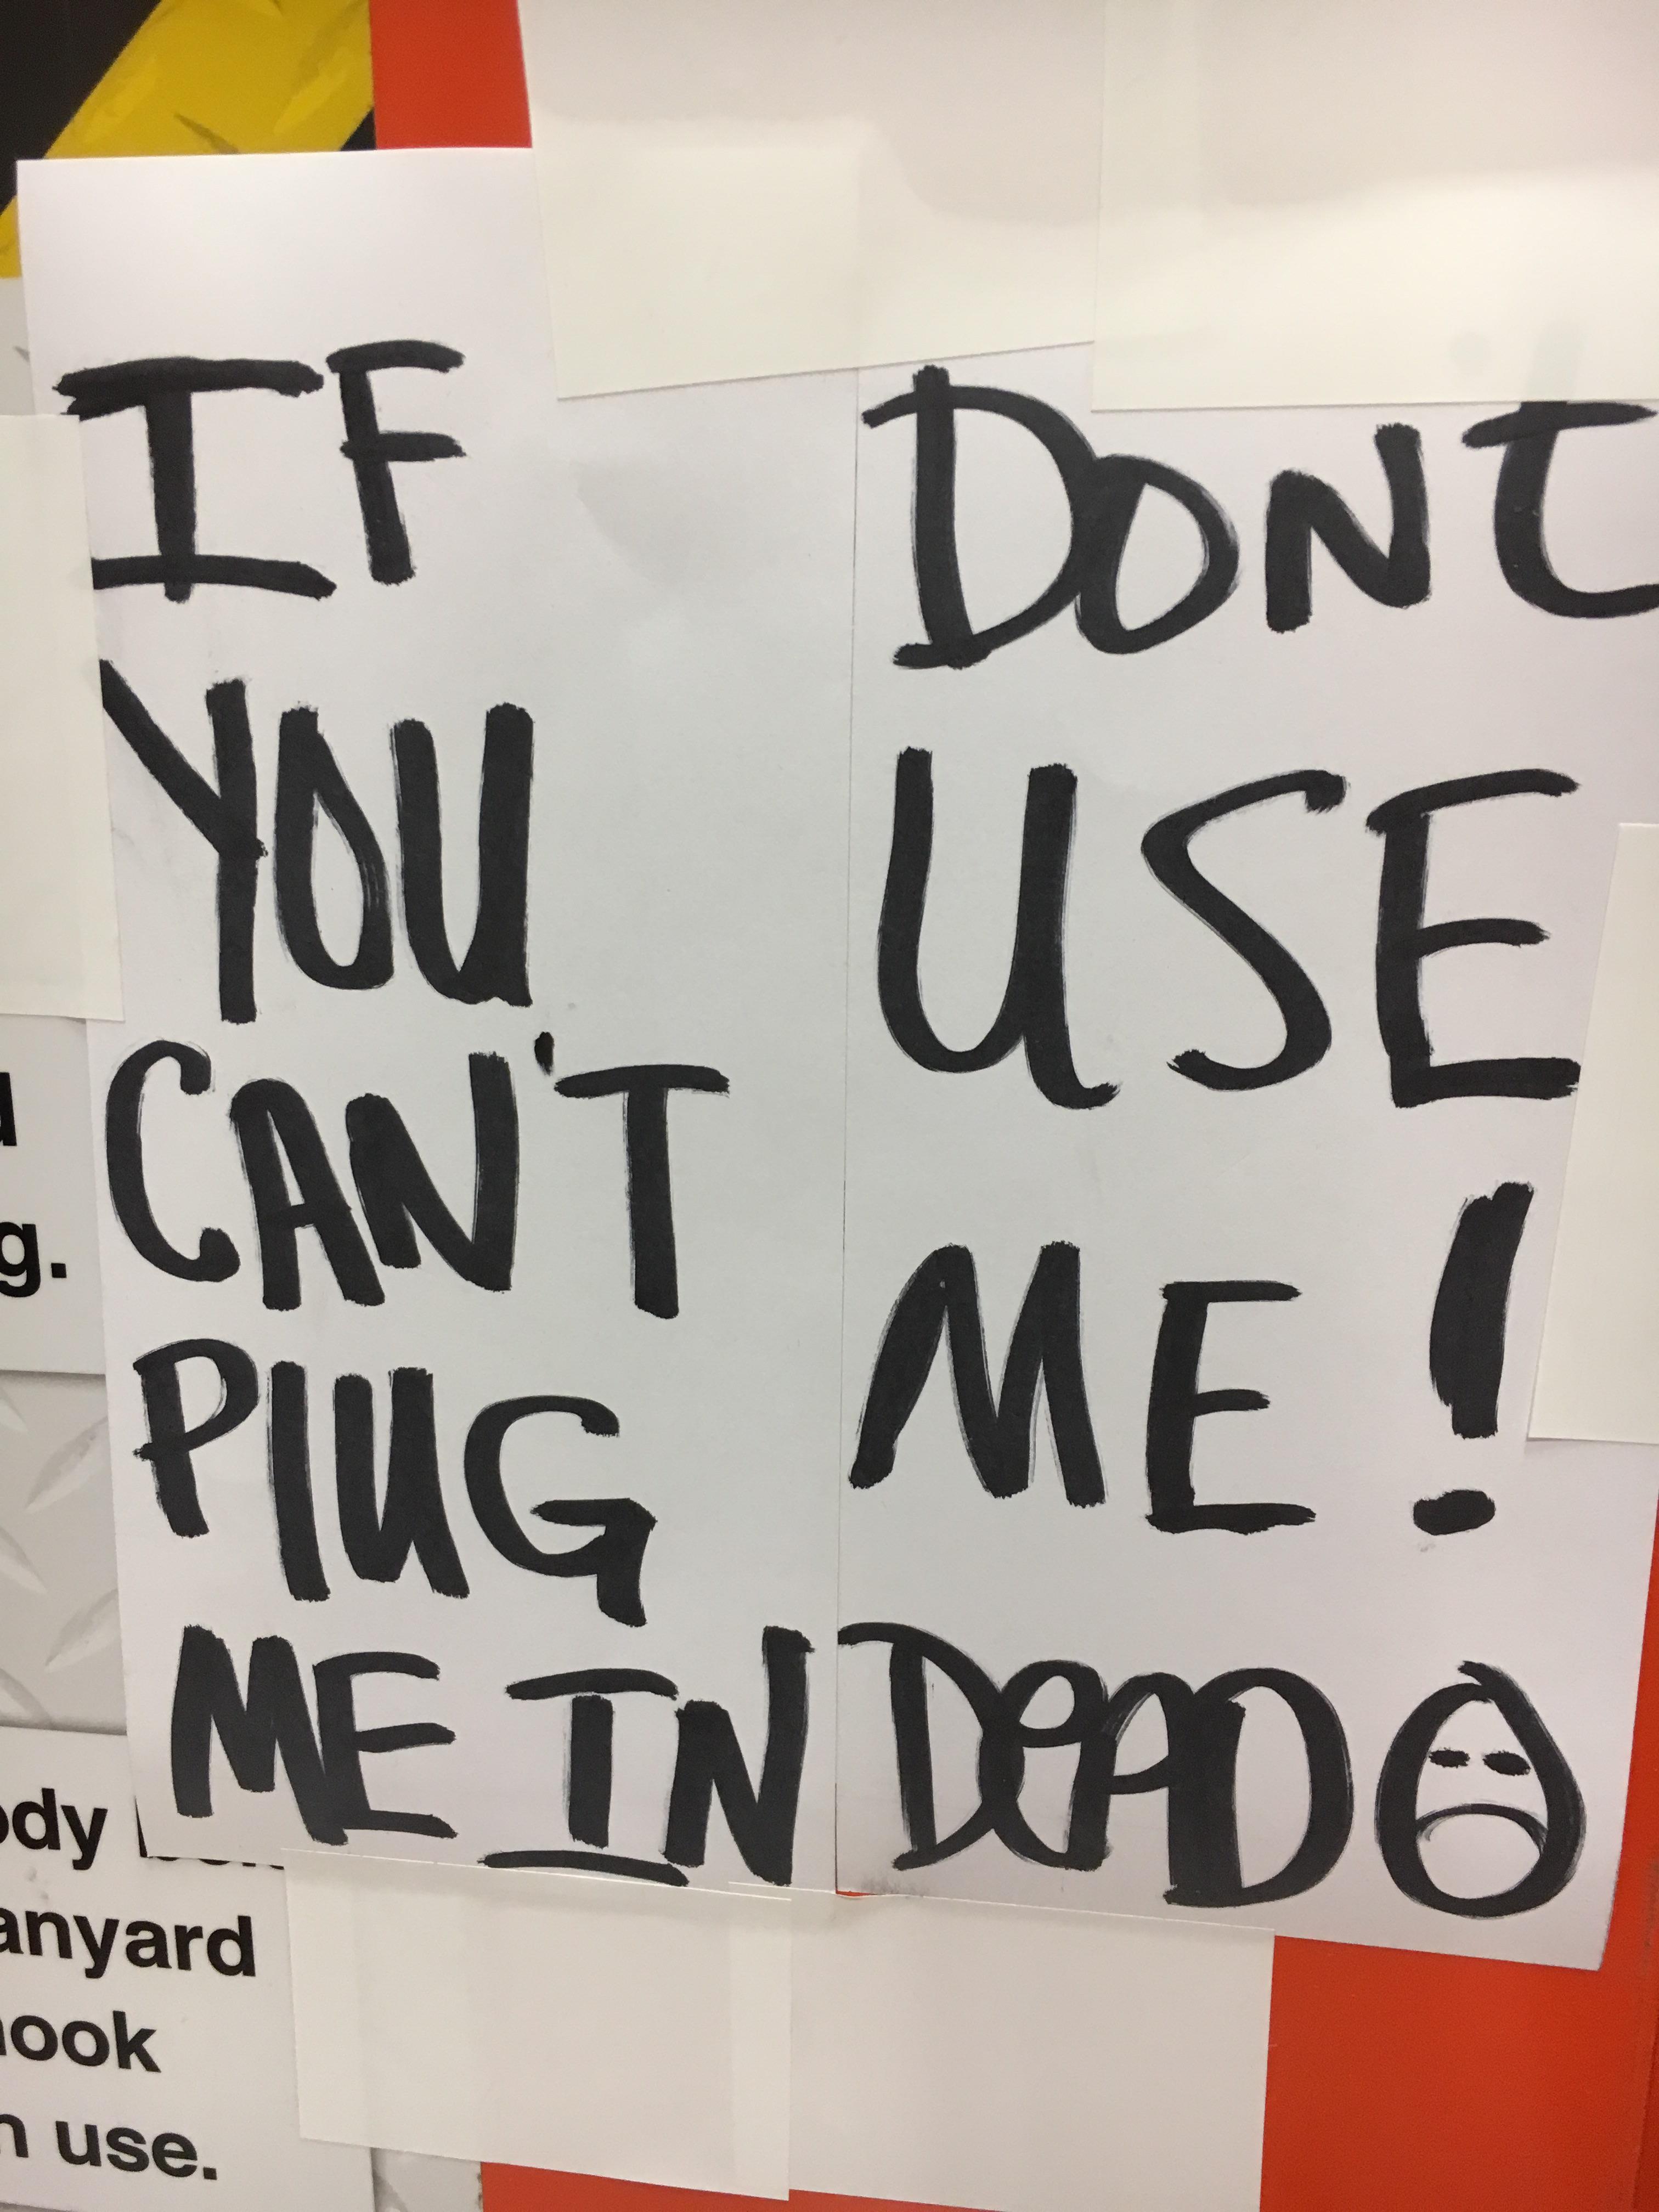 If don't you use can't me! Plug me in dead☹ : dontdeadopeninside